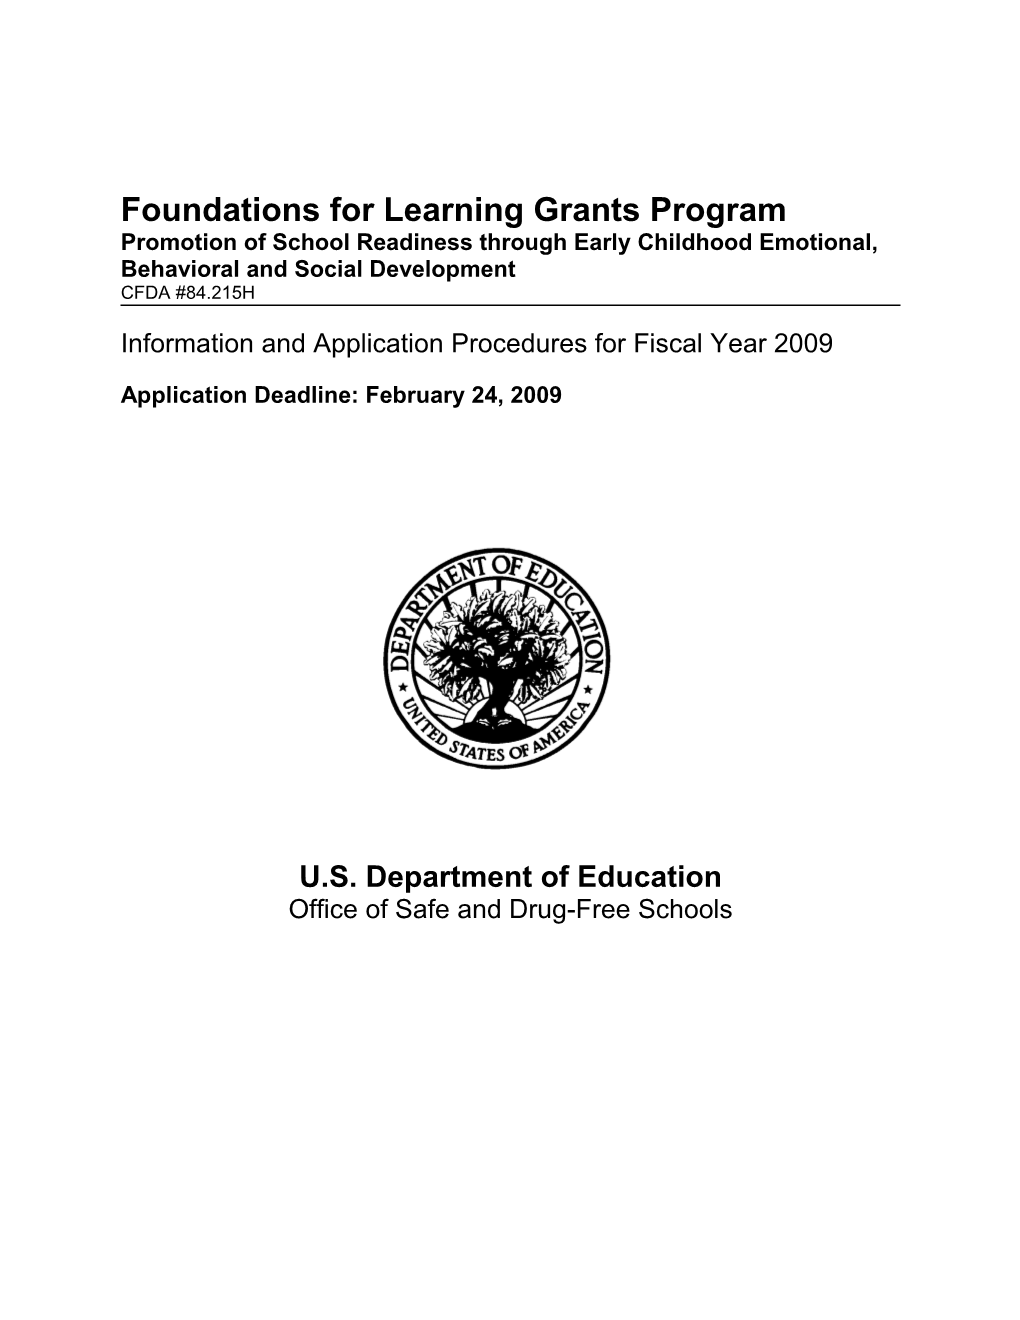 Foundations for Learning Grants Program (MS Office)